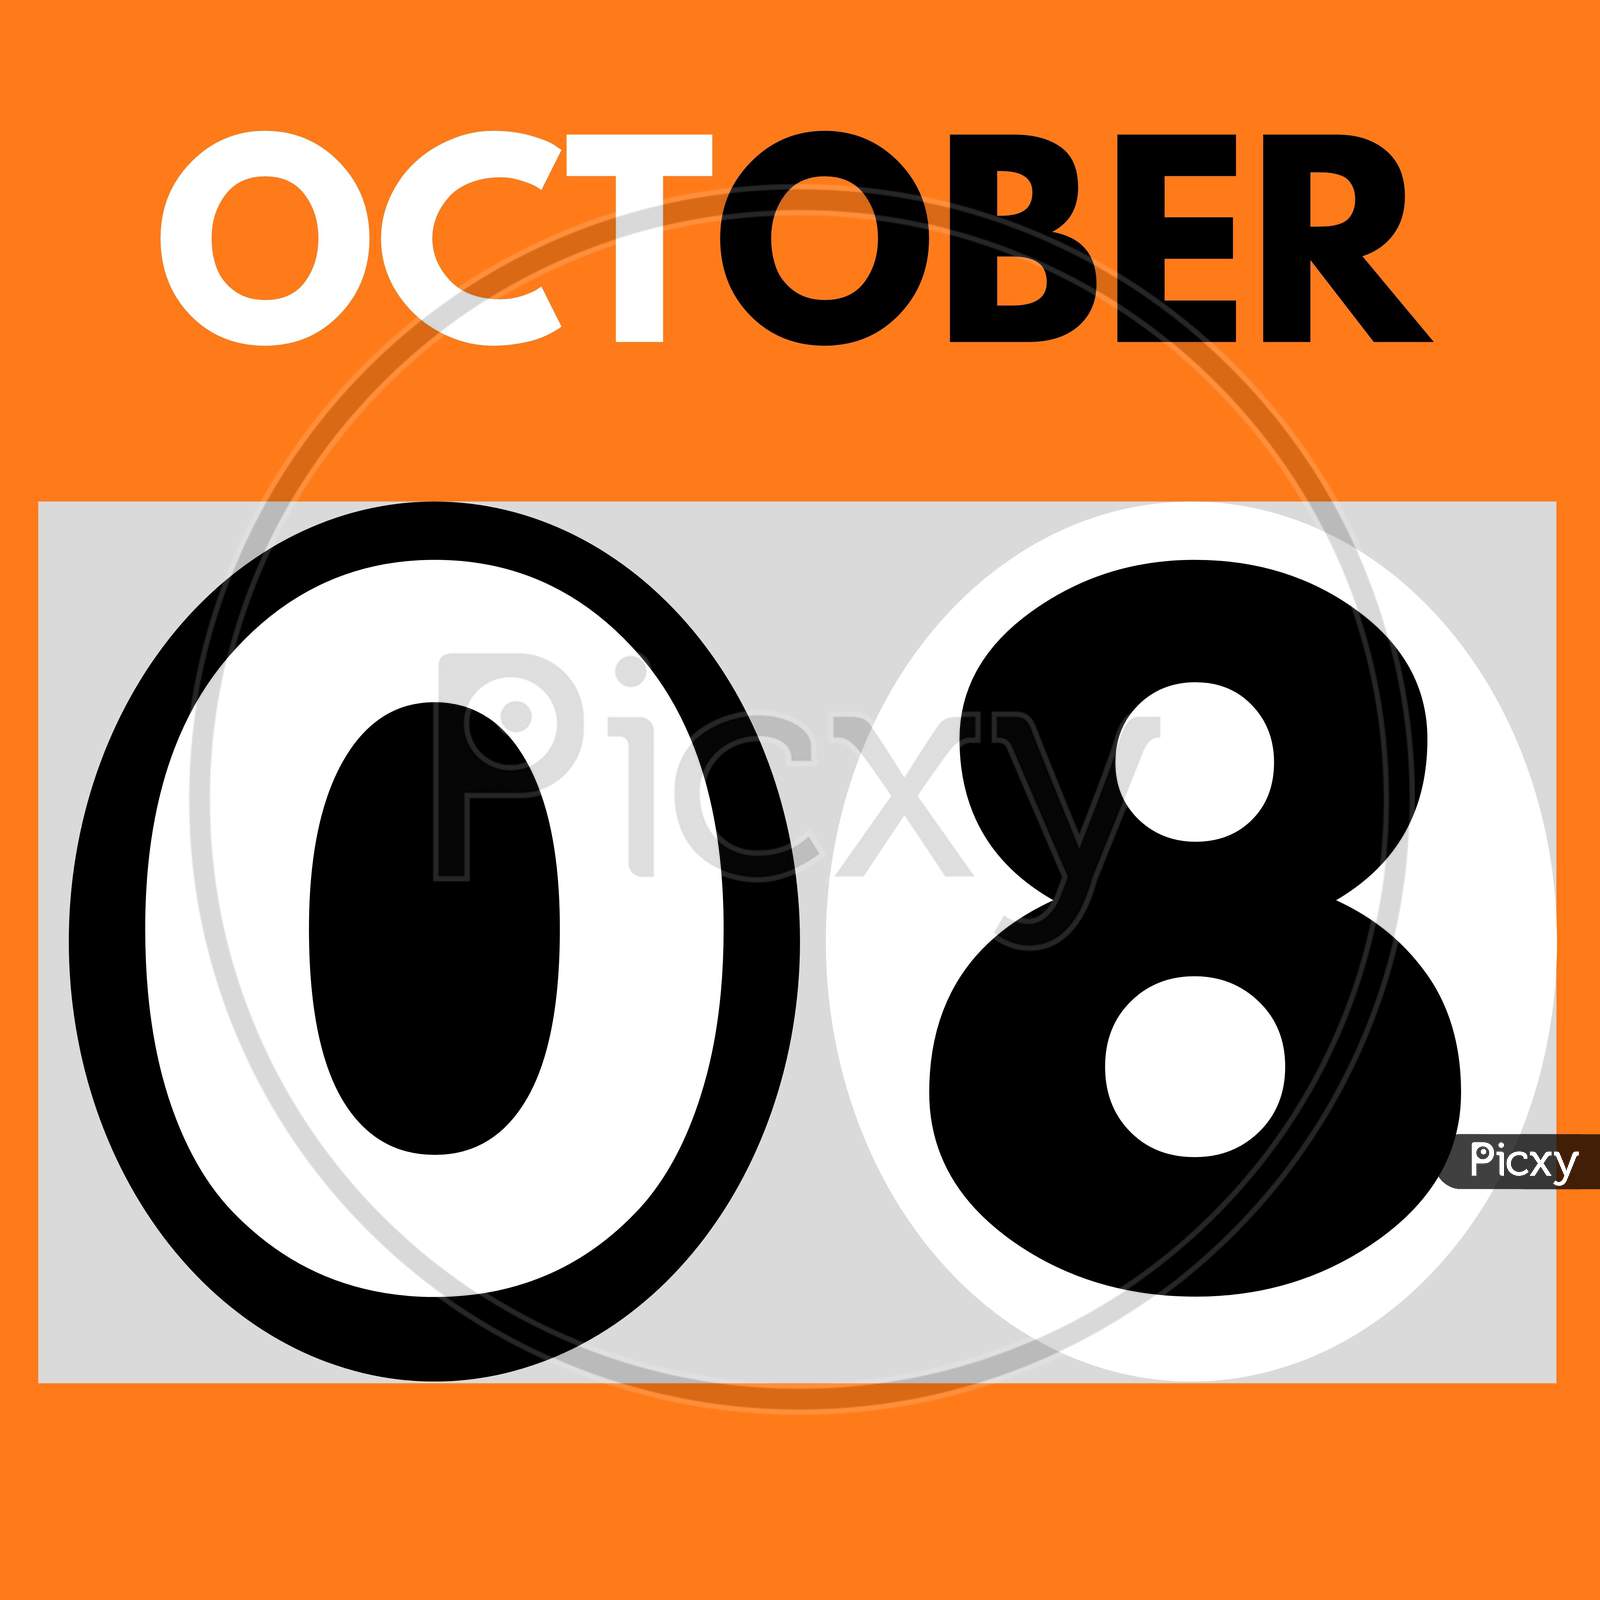 October 8 . Modern Daily Calendar Icon .Date ,Day, Month .Calendar For The Month Of October